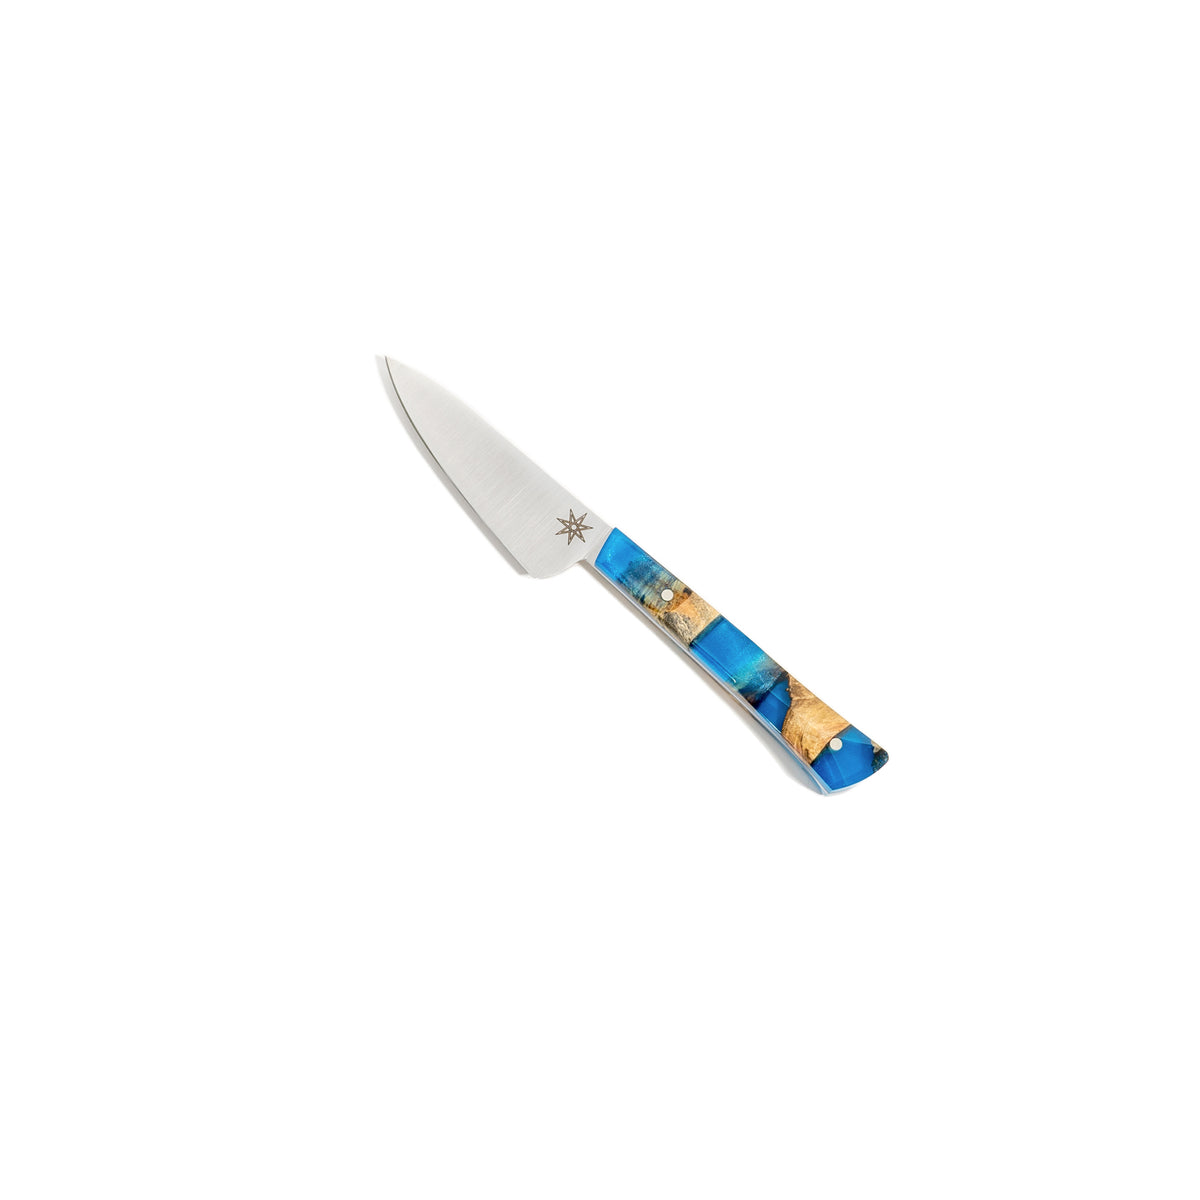 Town Cutler Tahoe Bliss Paring Knife. Nitro-V stainless steel blade with blue and buckeye burl handle.